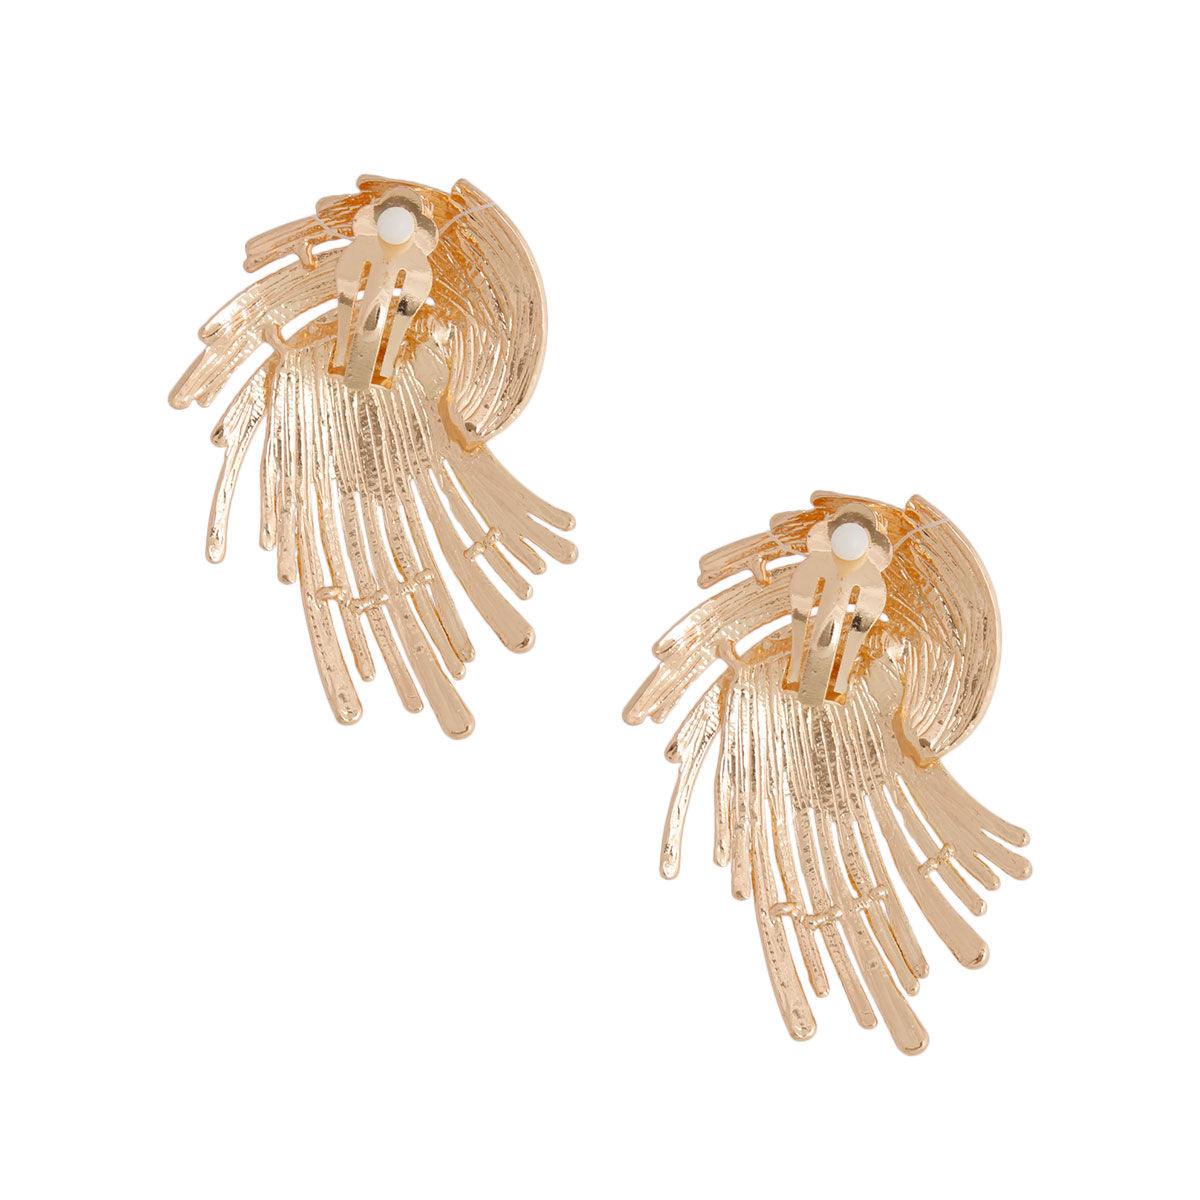 Get Glam with Gold Rope Clip-On Earrings - Fashion Jewelry Must-Have!